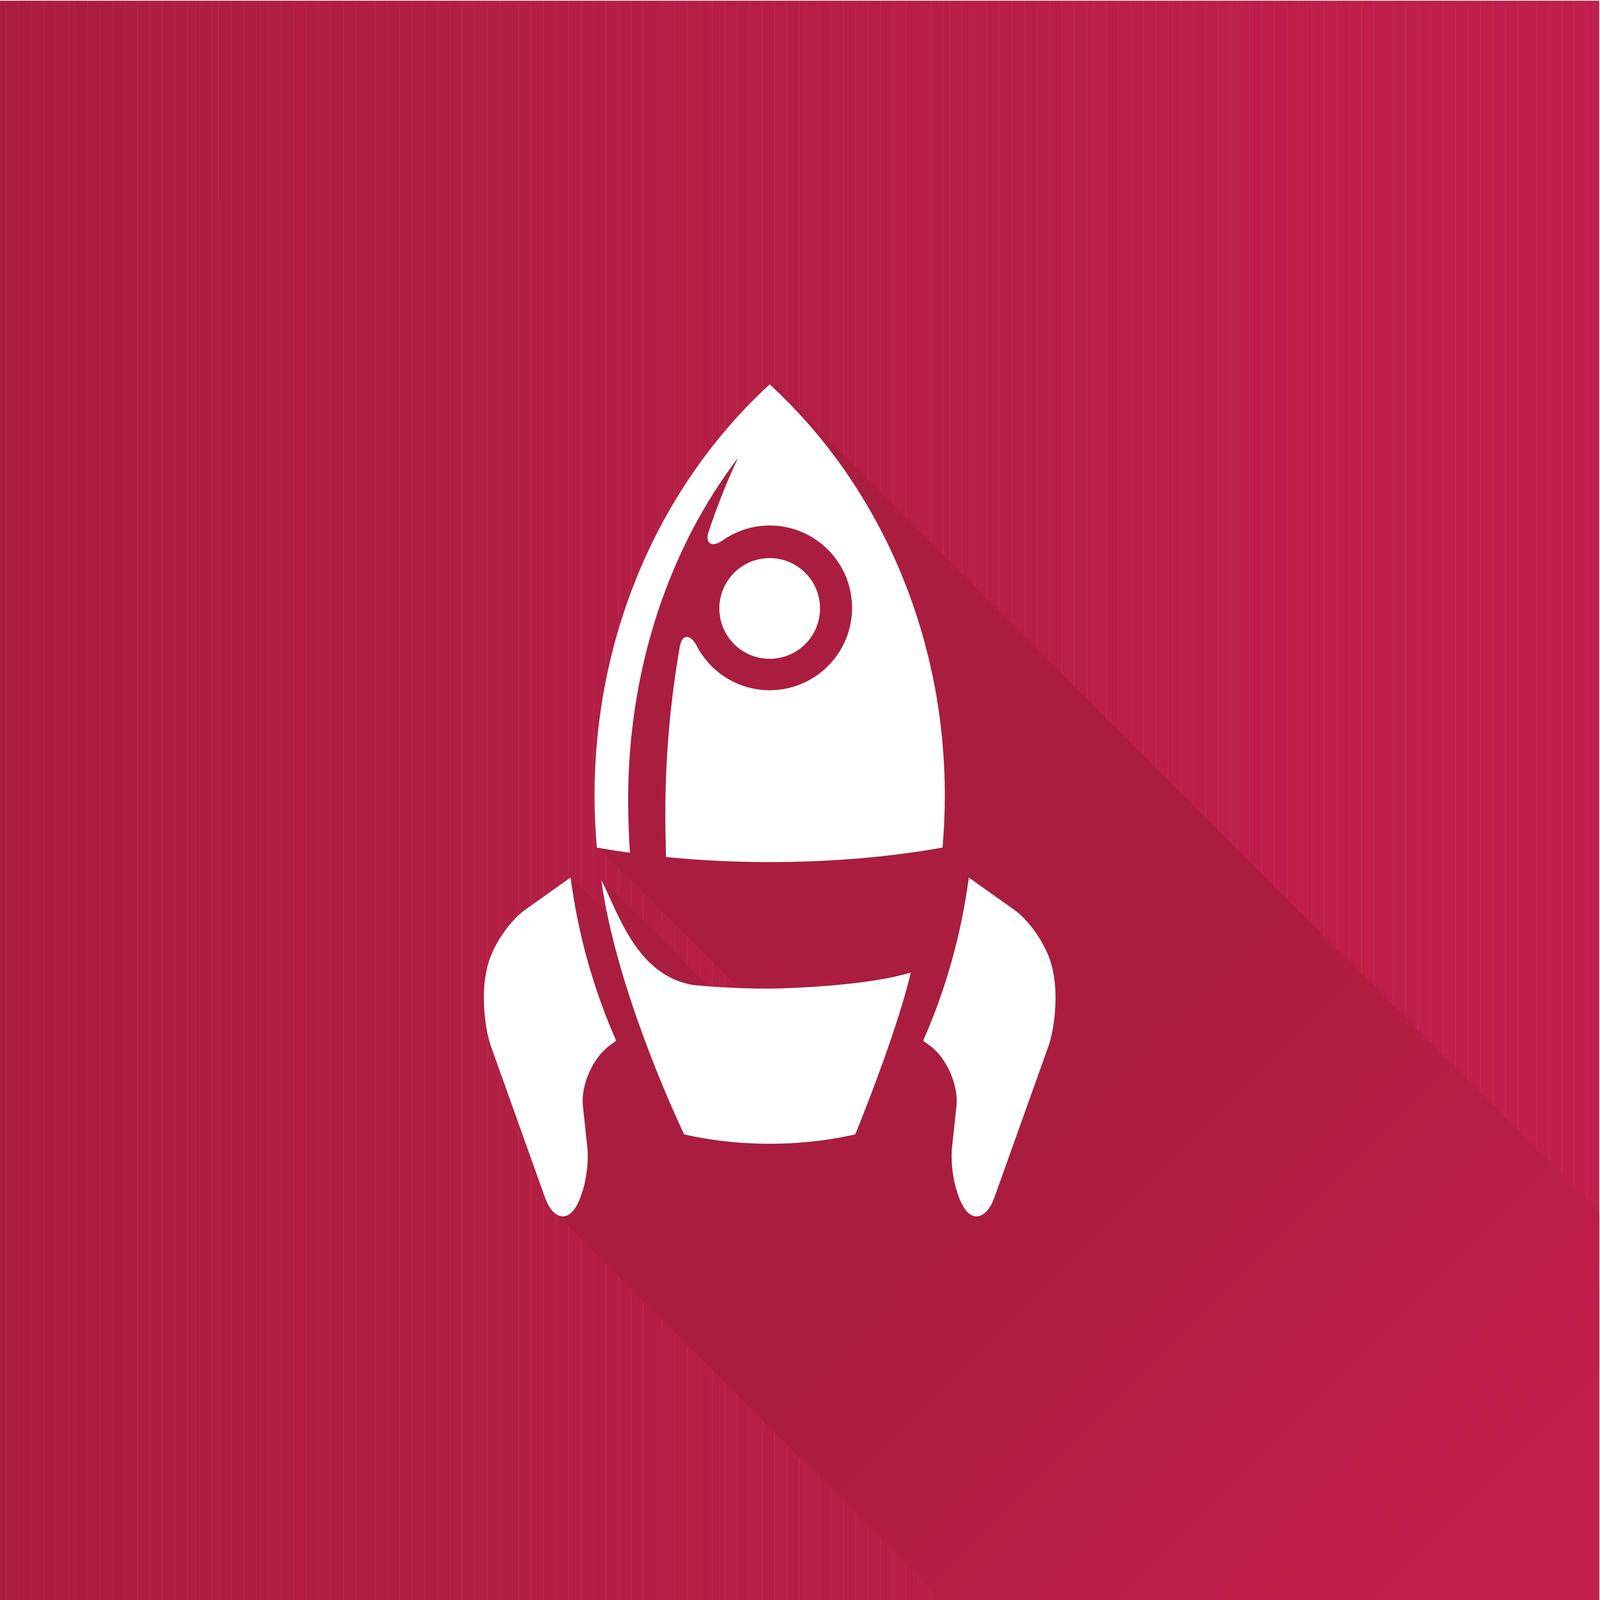 Rocket icon in Metro user interface color style. Launching startup